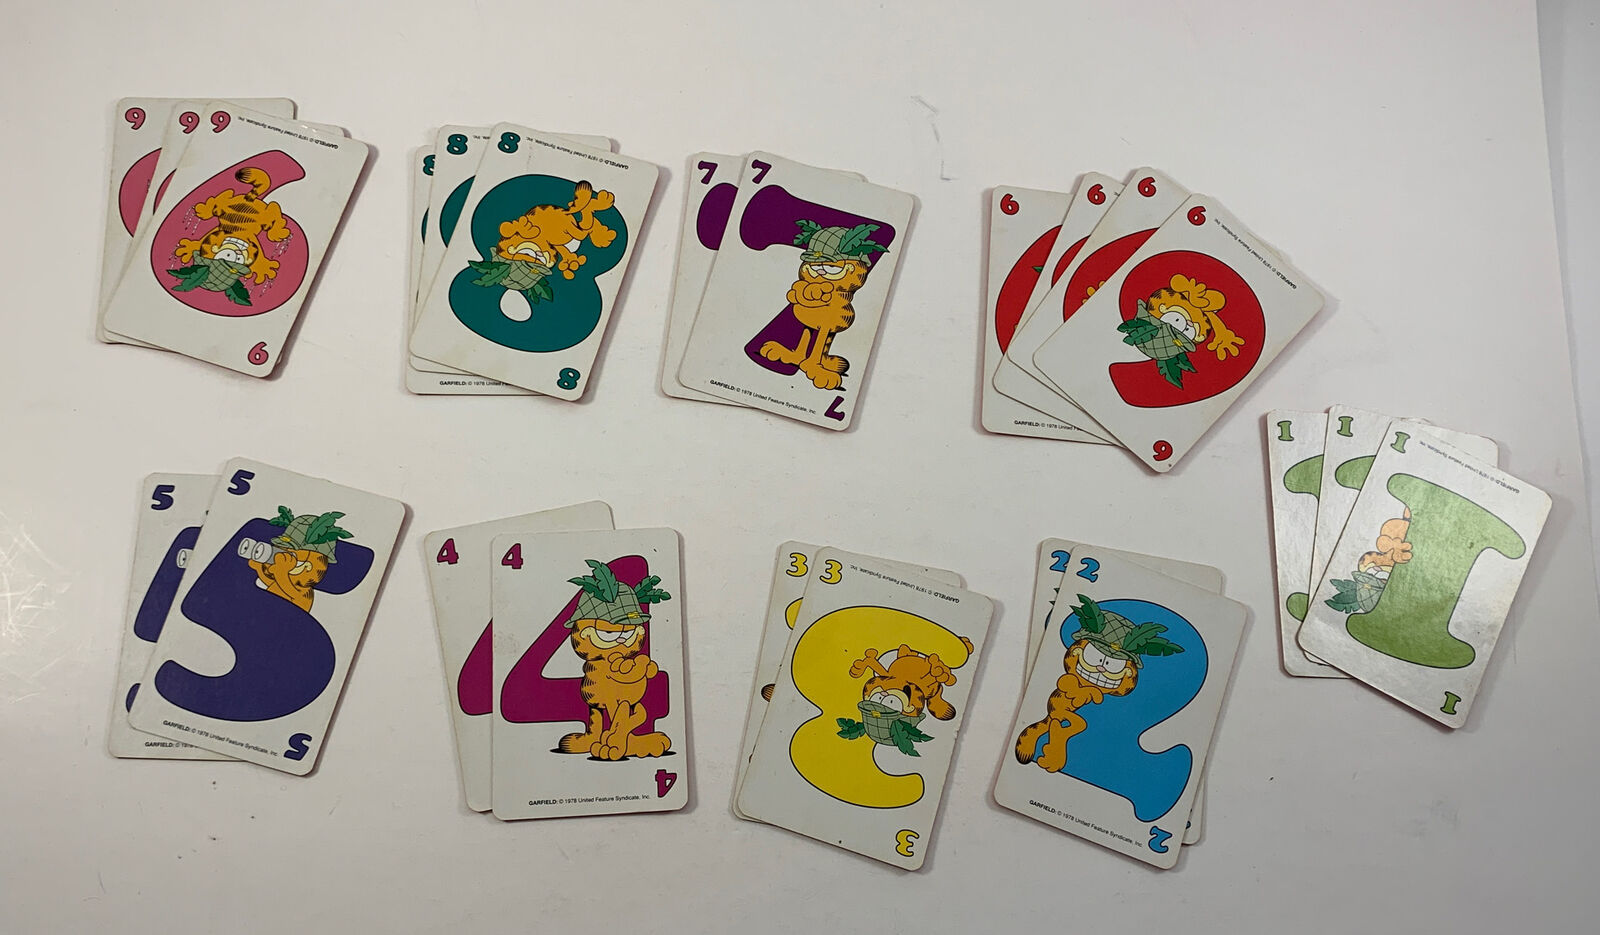 Garfield War Playing Cards1978 Orange Cat Replacement Cards. Not Complete23 Card